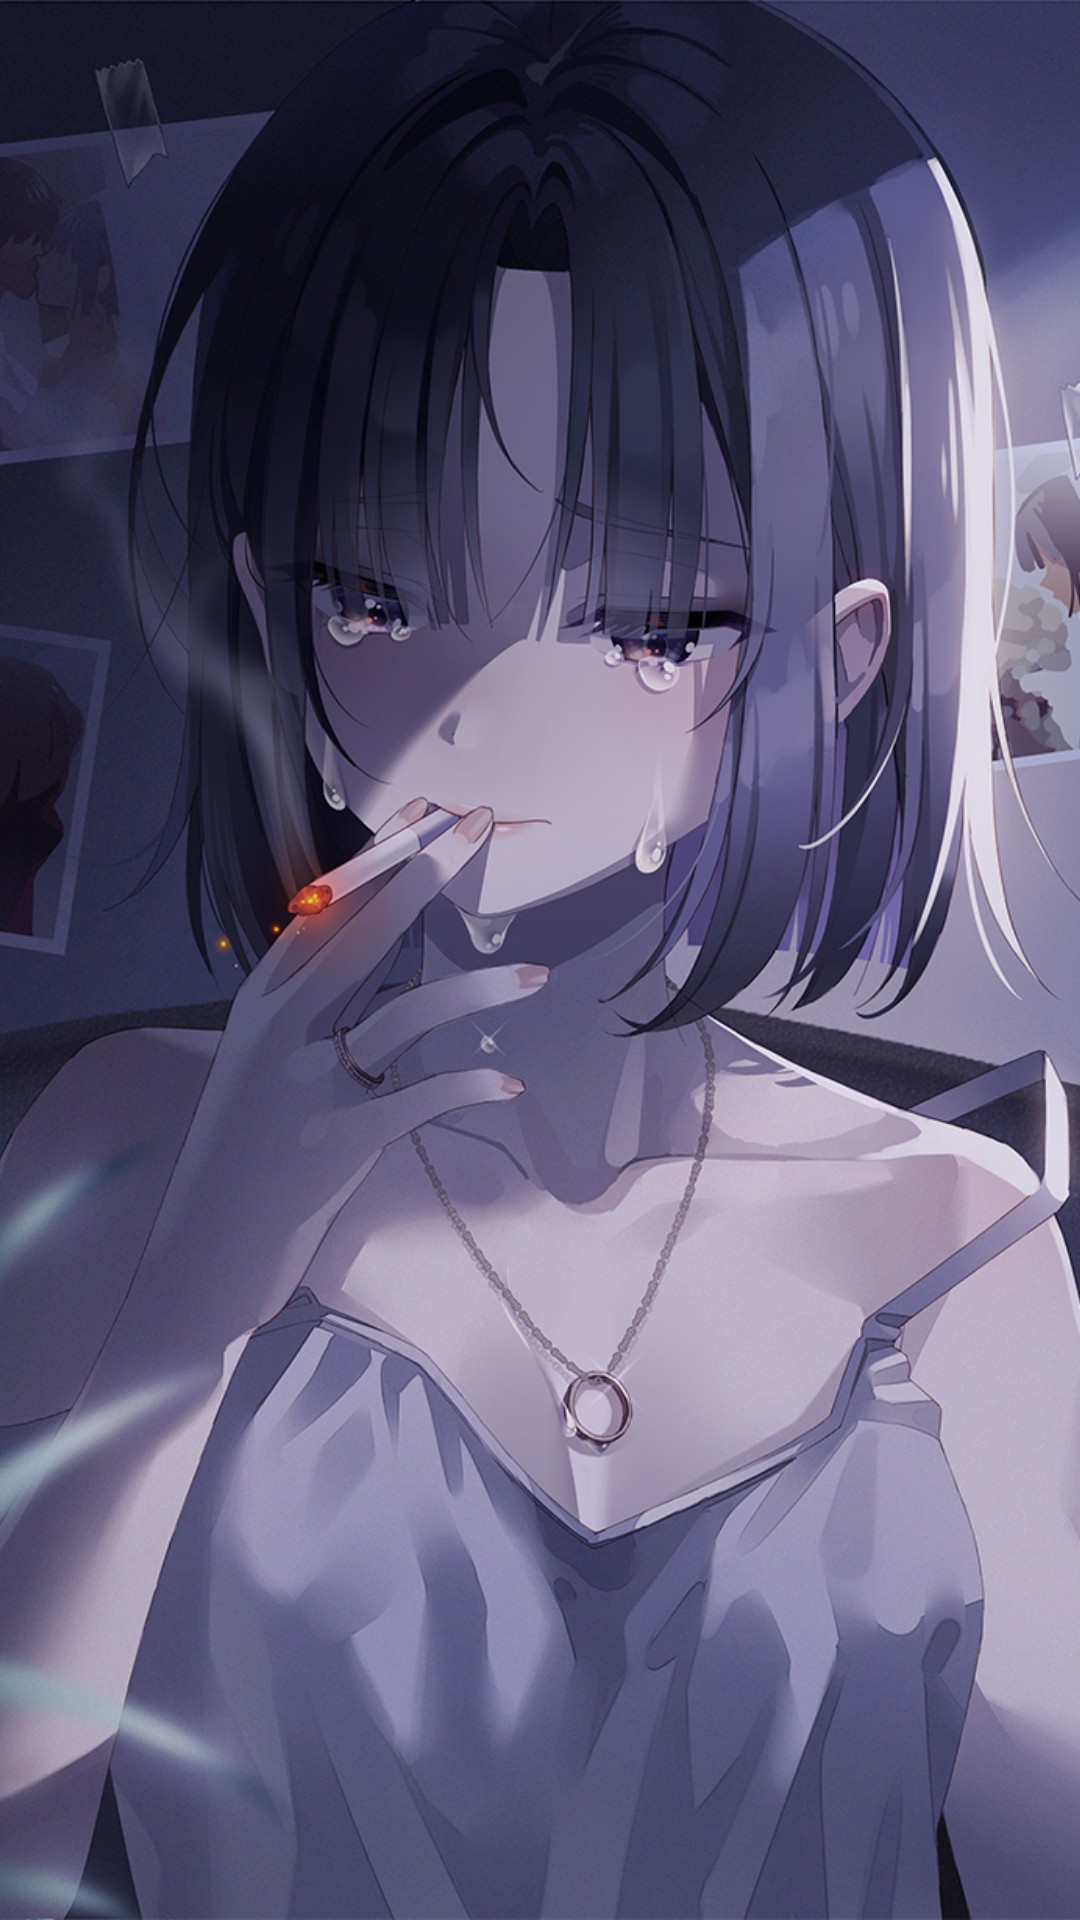 Crying Anime Girl Wallpapers - Top 20 Best Crying Anime Girl Wallpapers  Download